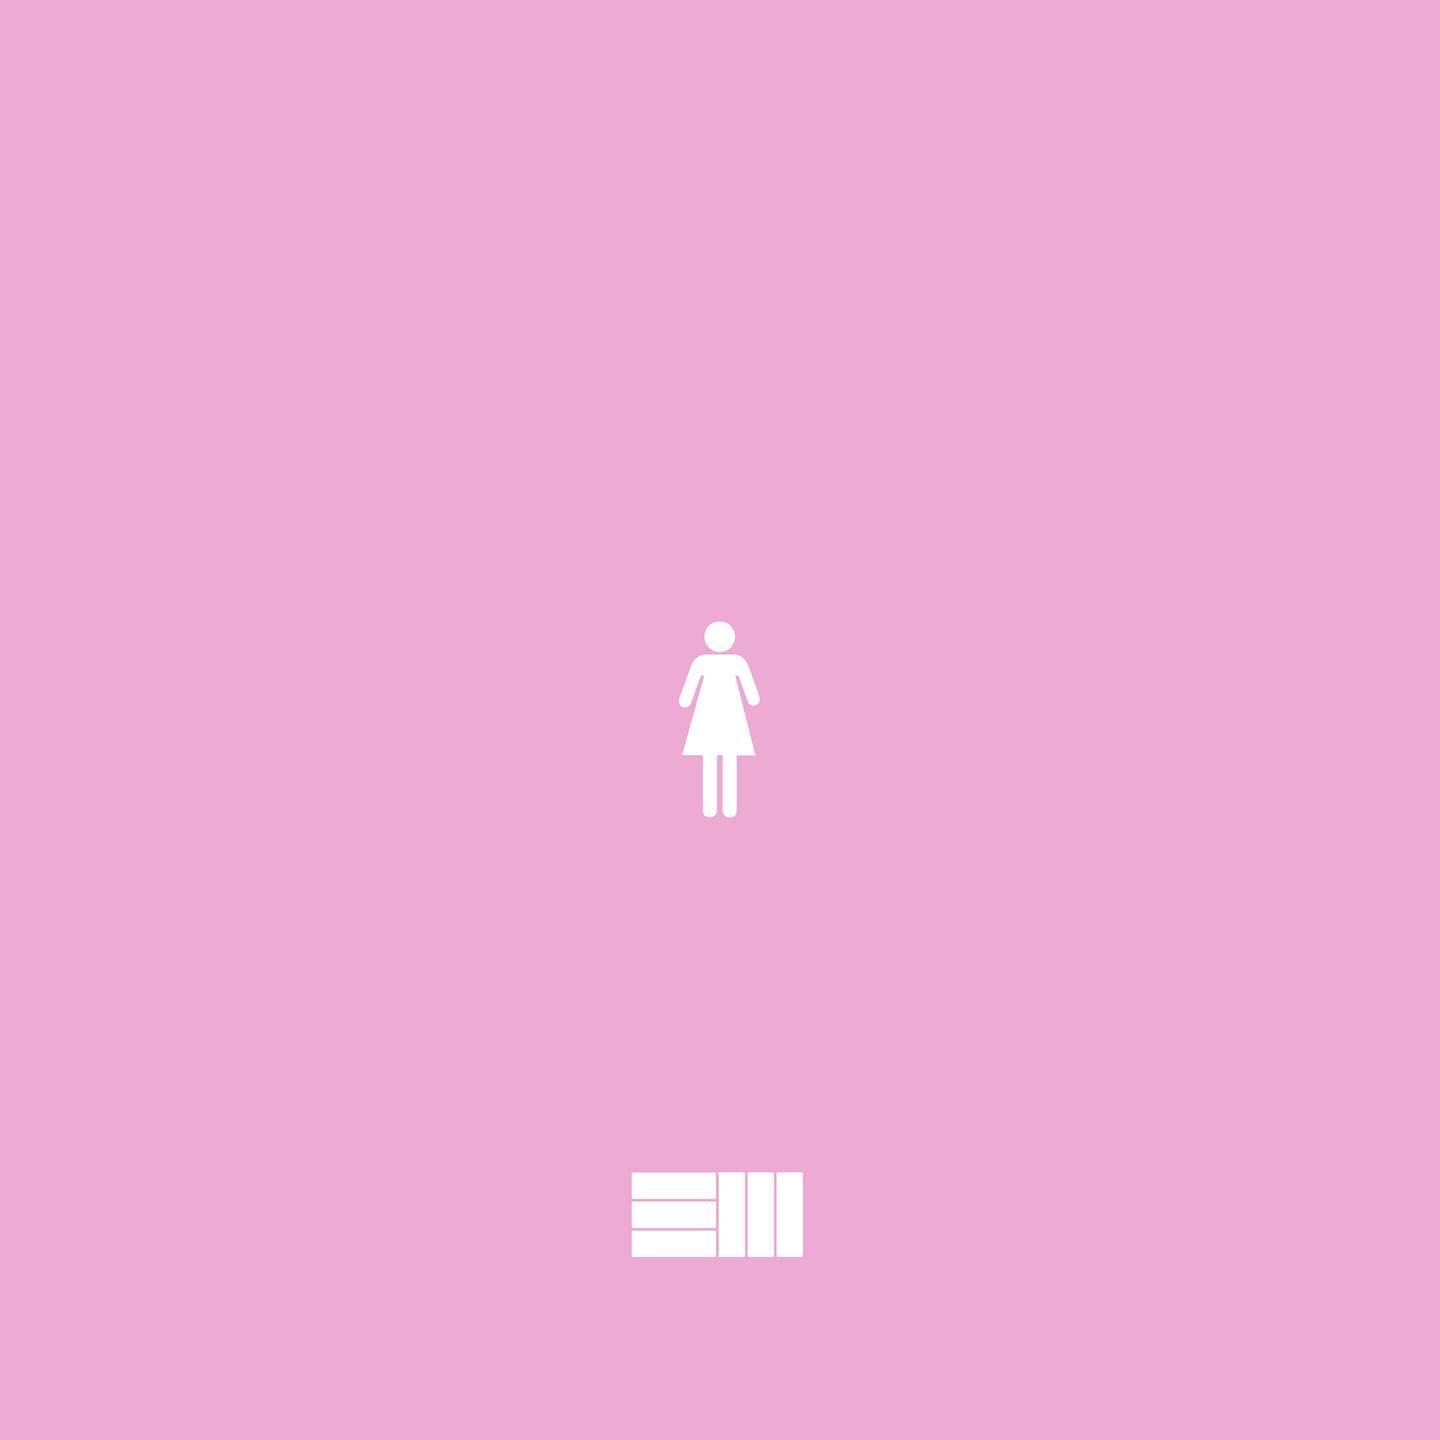 Russ‘ “That’s My Girl” Leak Download MP3 Free Audio File